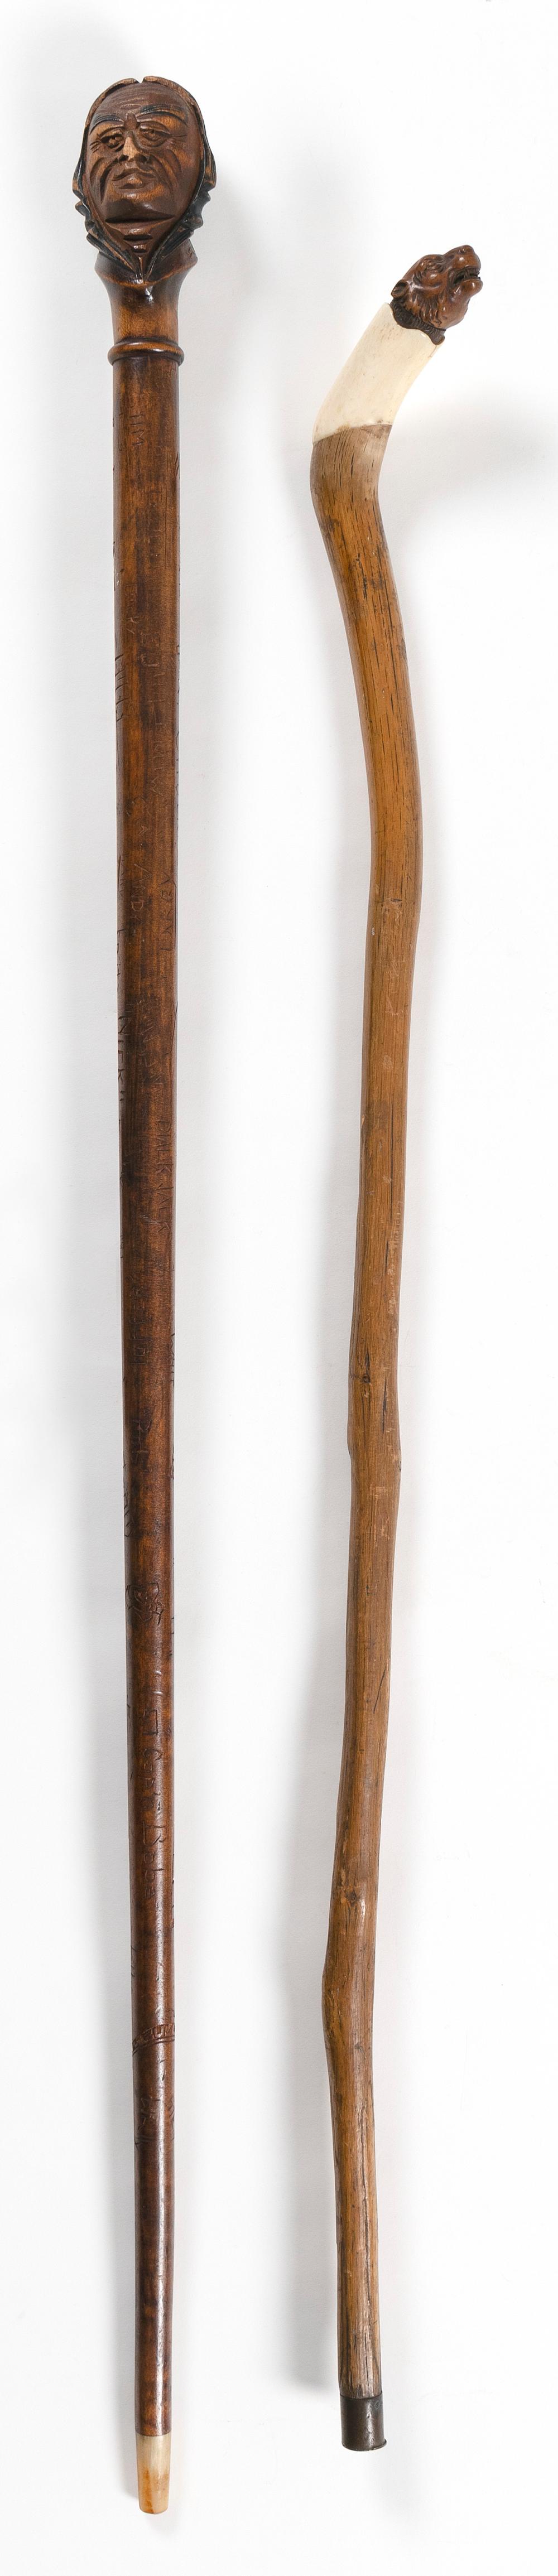 TWO CARVED WOODEN CANES 20TH CENTURY 34e89c